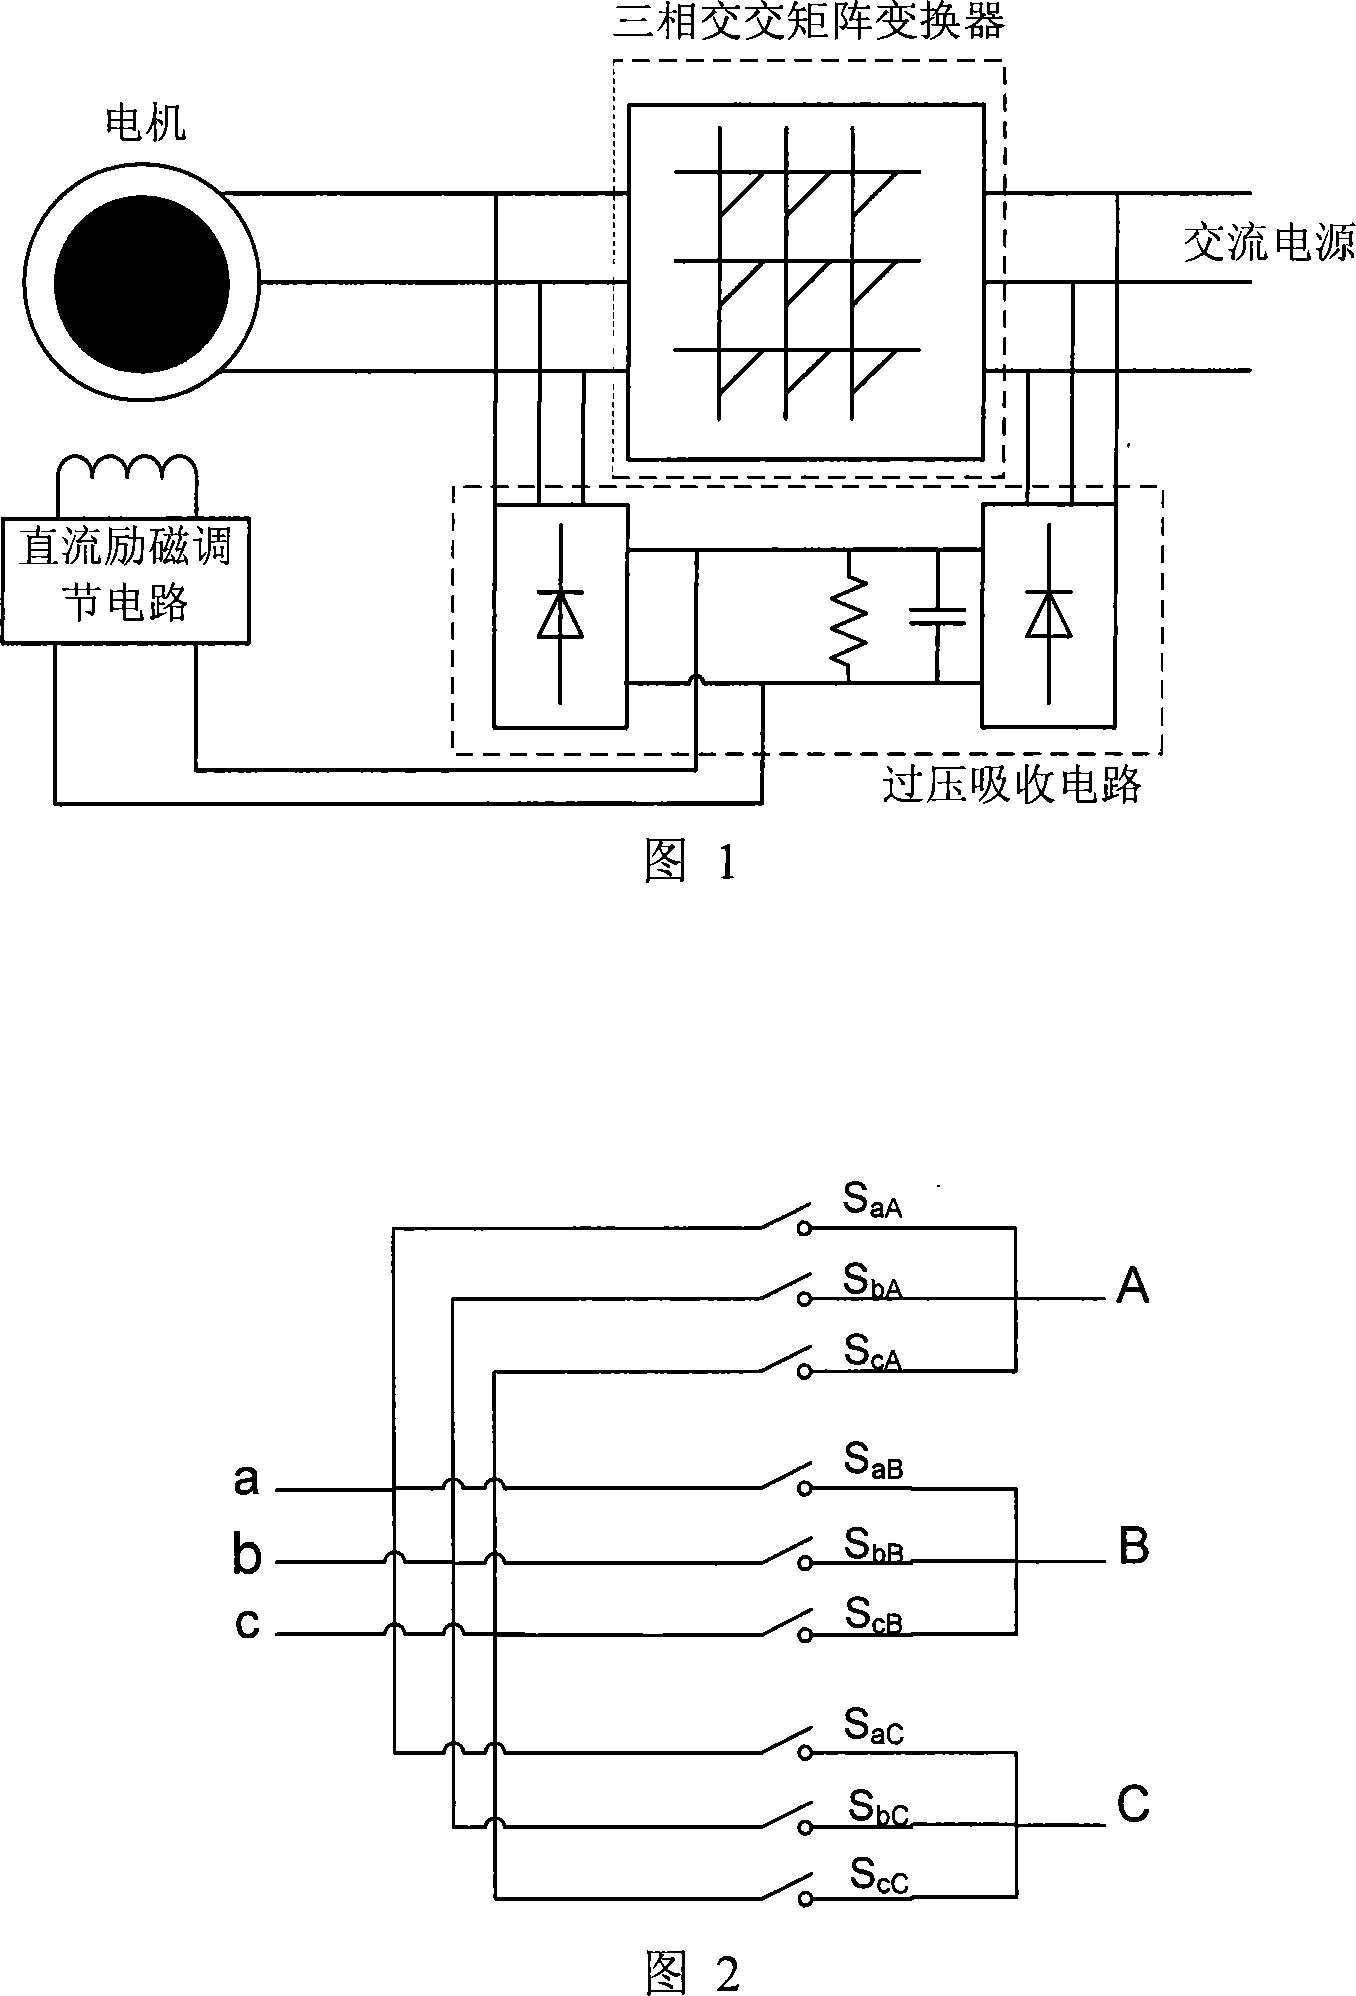 AC motor matrix type controller with DC excitation function